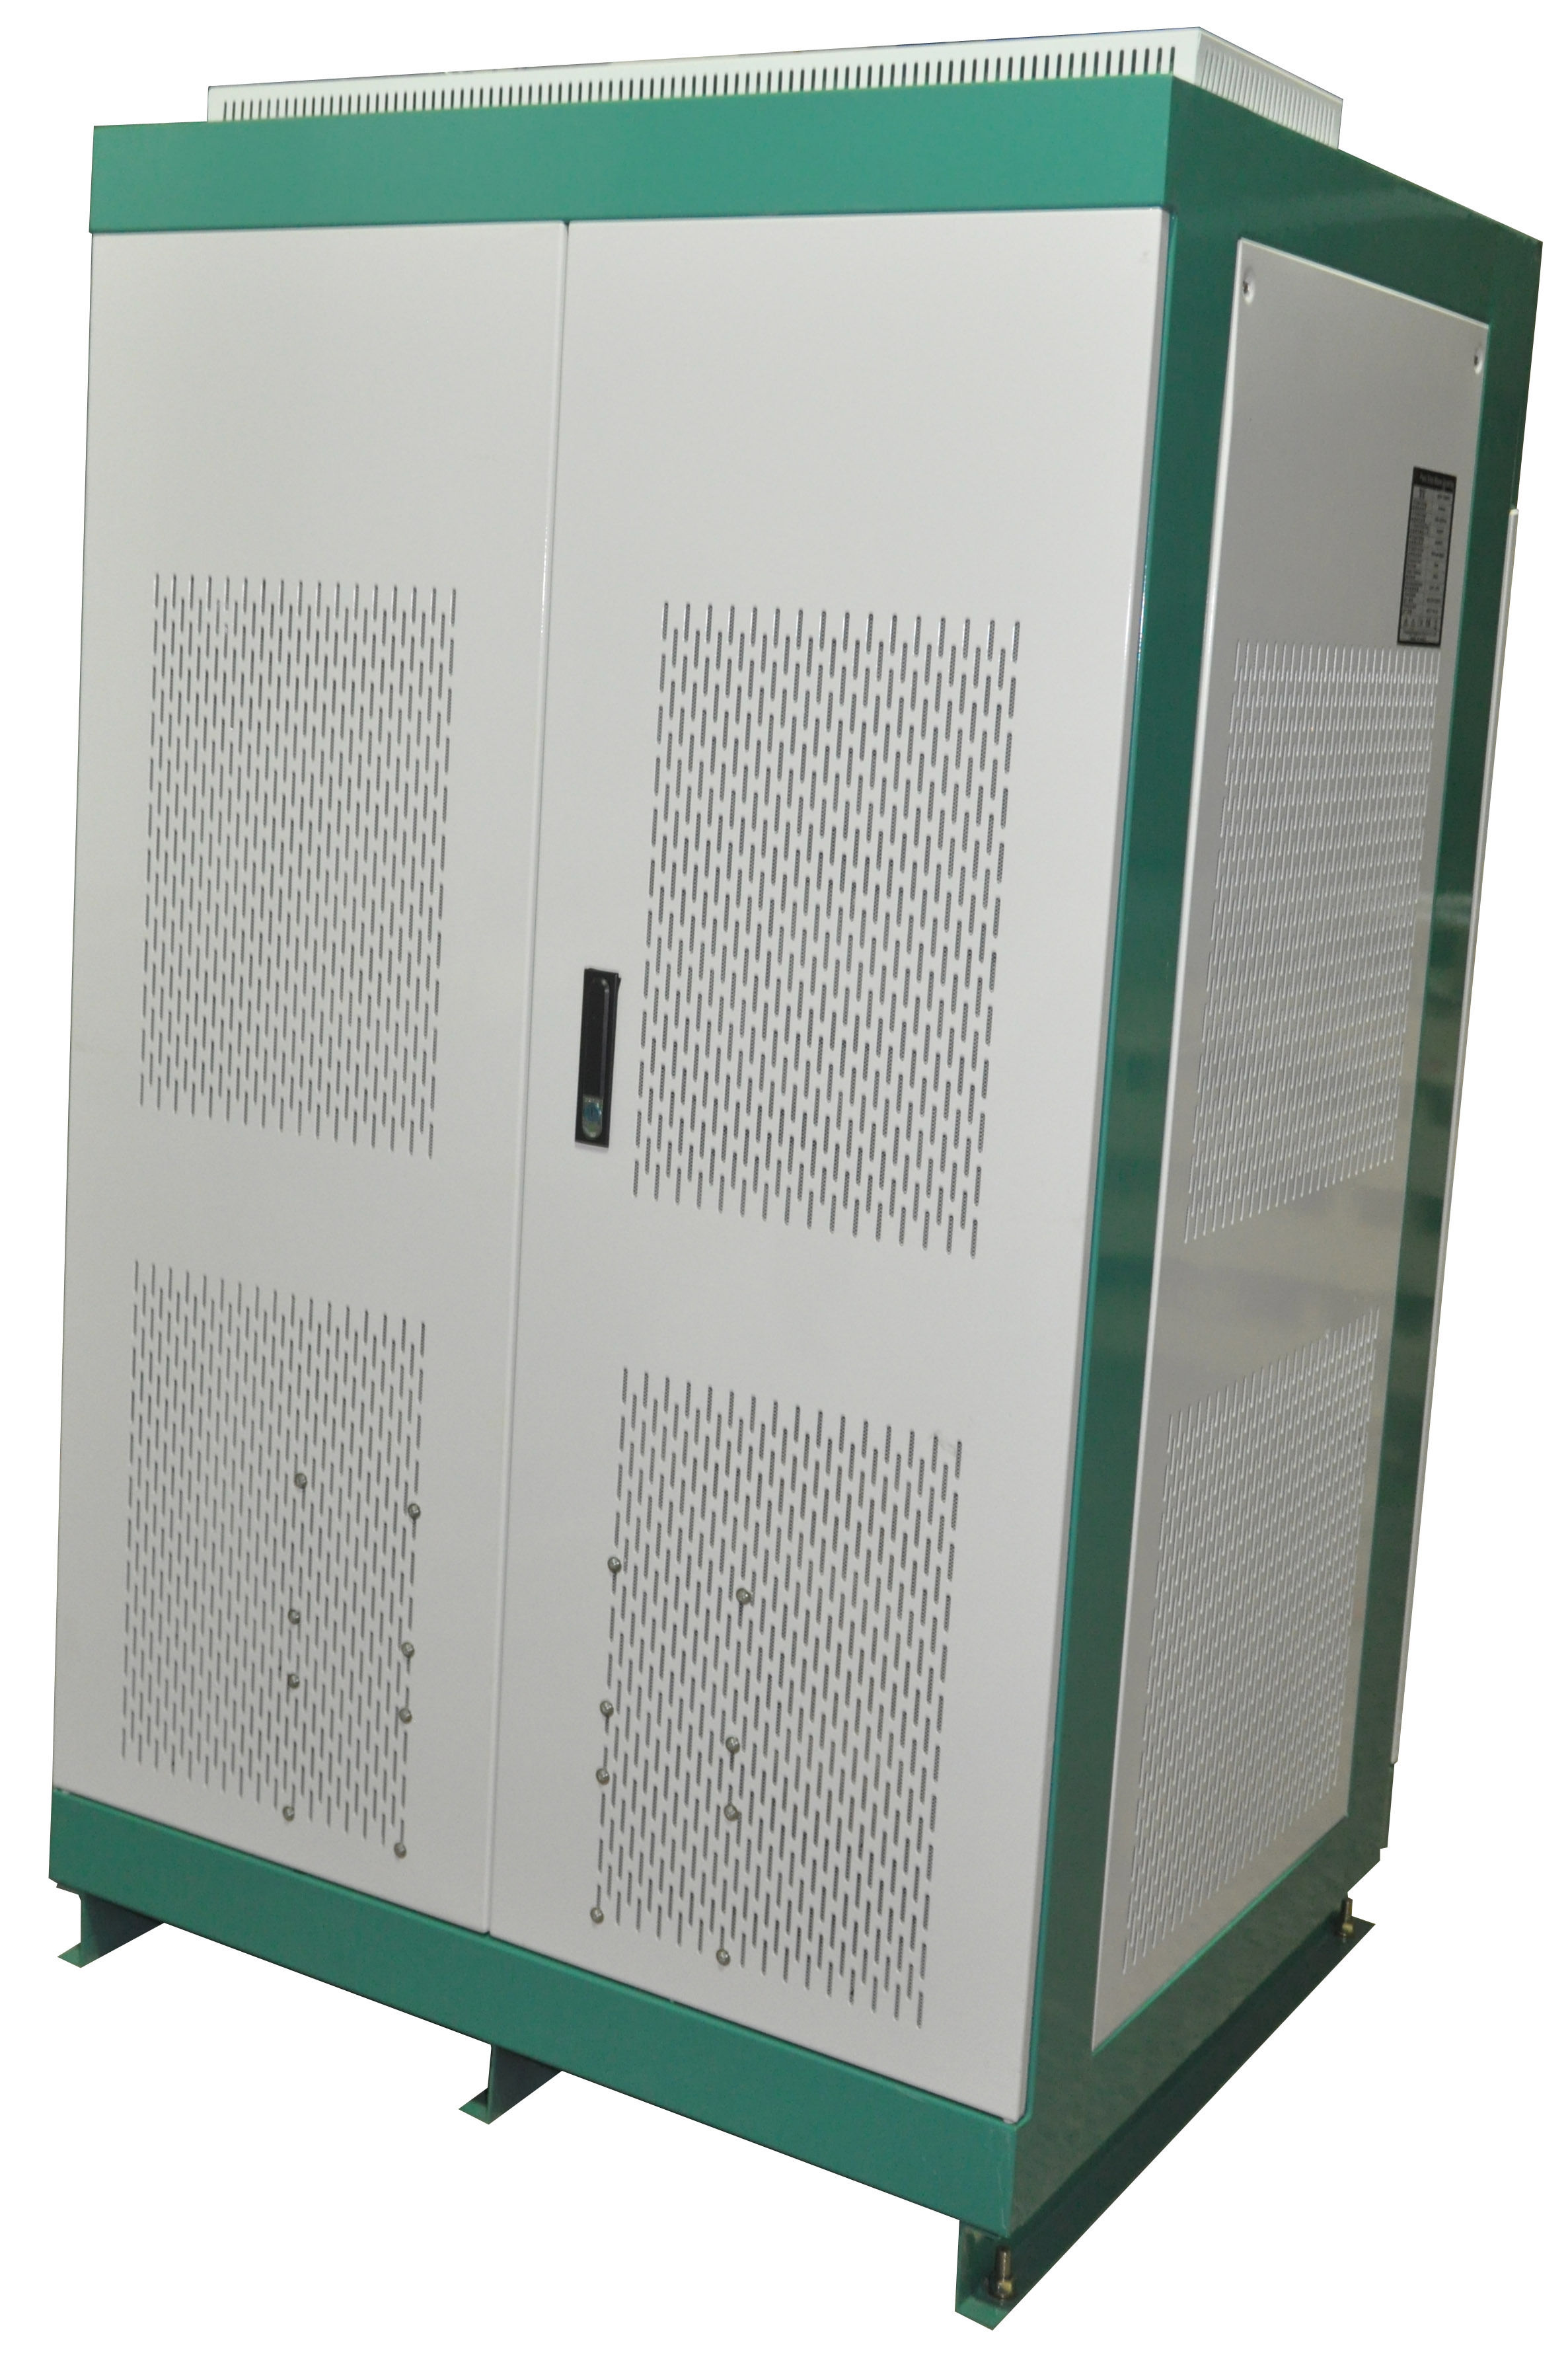 150KW off grid hybrid inverter 3 phase 400Vac output with charger